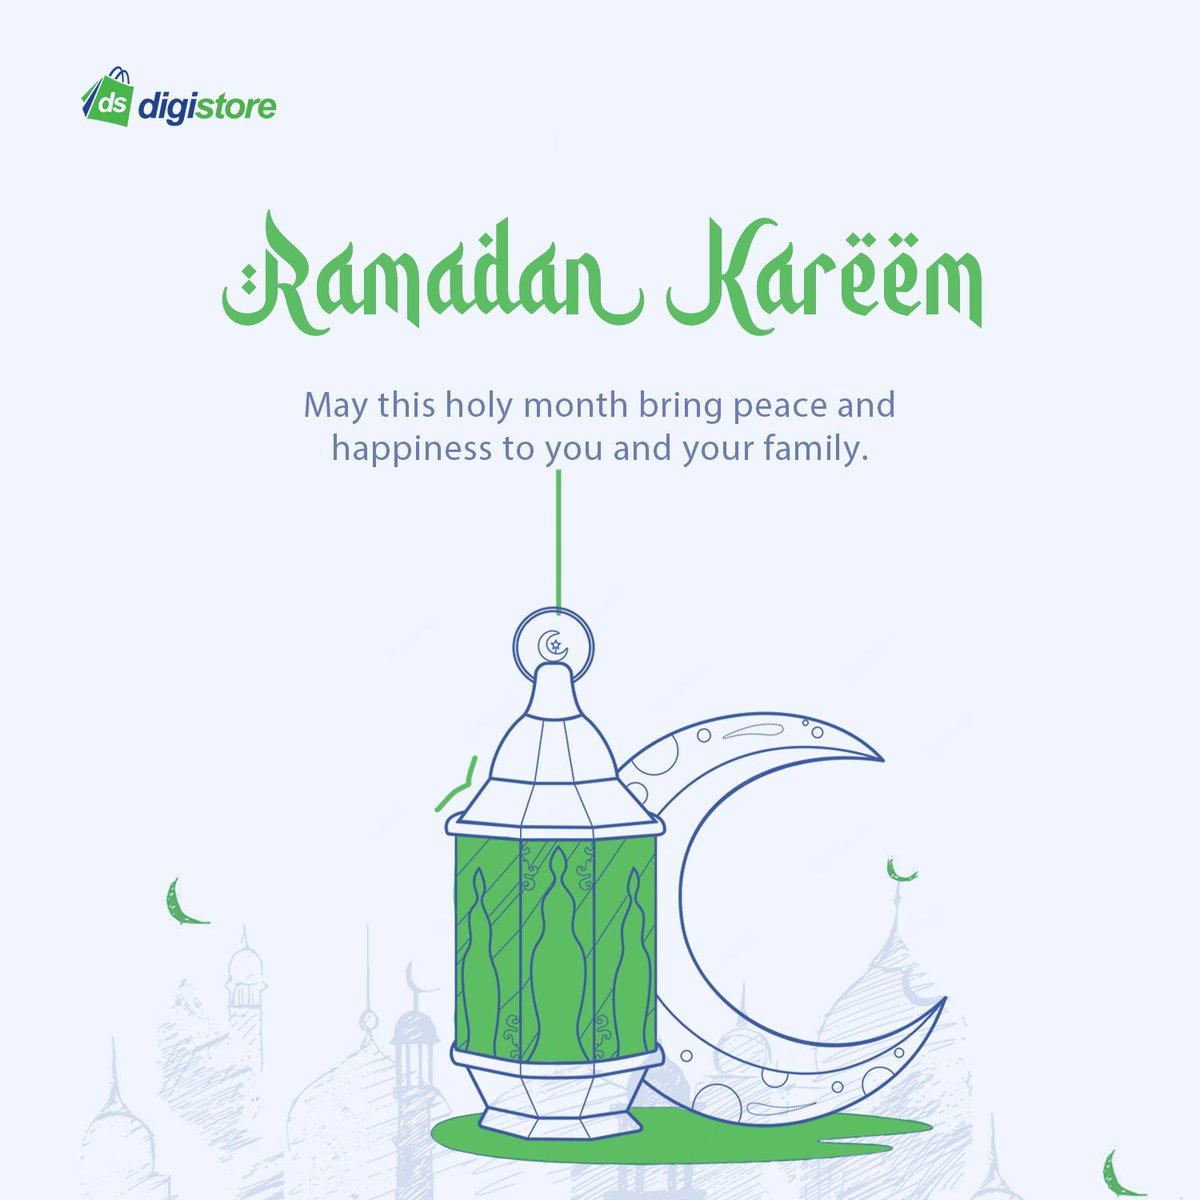 Wishing you and your loved ones a blessed Ramadan! May this month be filled with peace, joy, and spiritual growth. Ramadan Kareem! 🌙✨🌟 #RamadanKareem #BlessedMonth